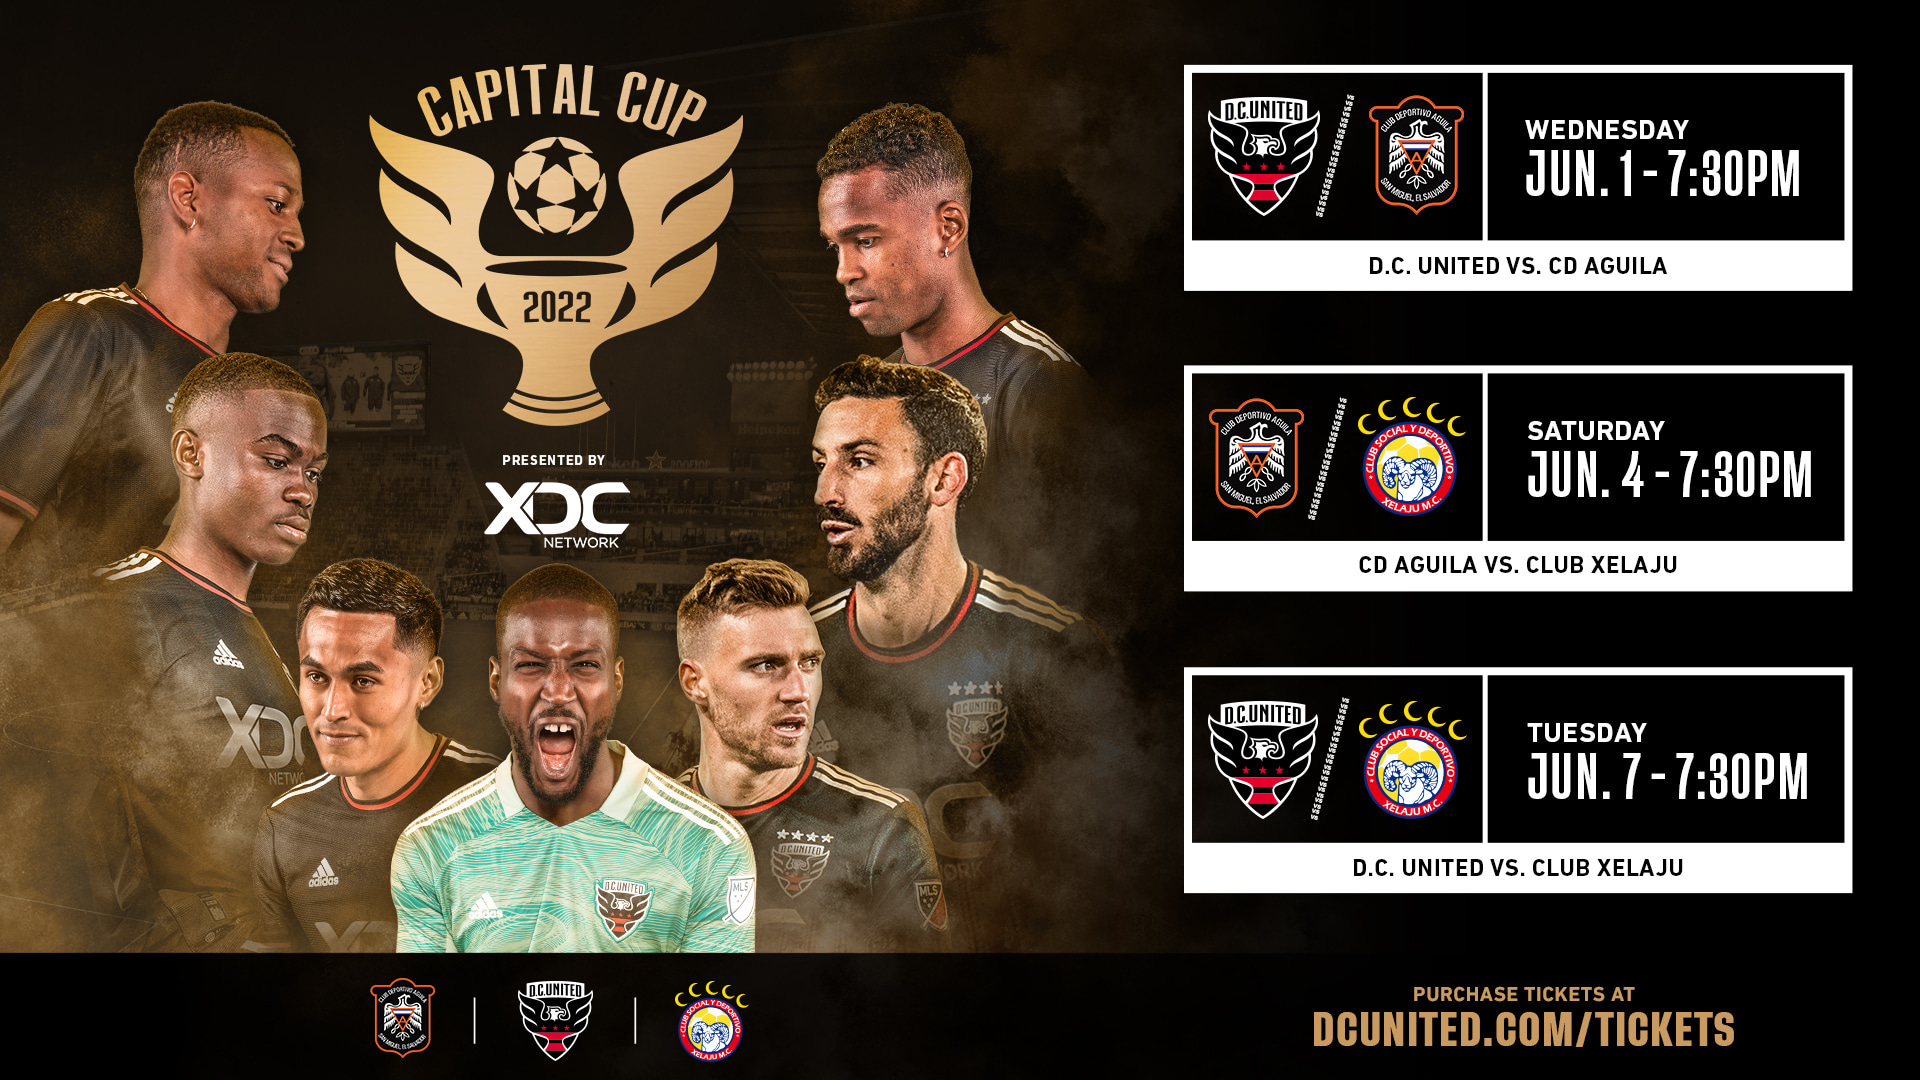 What to Know About the 2022 Capital Cup, presented by XDC Network | DC  United